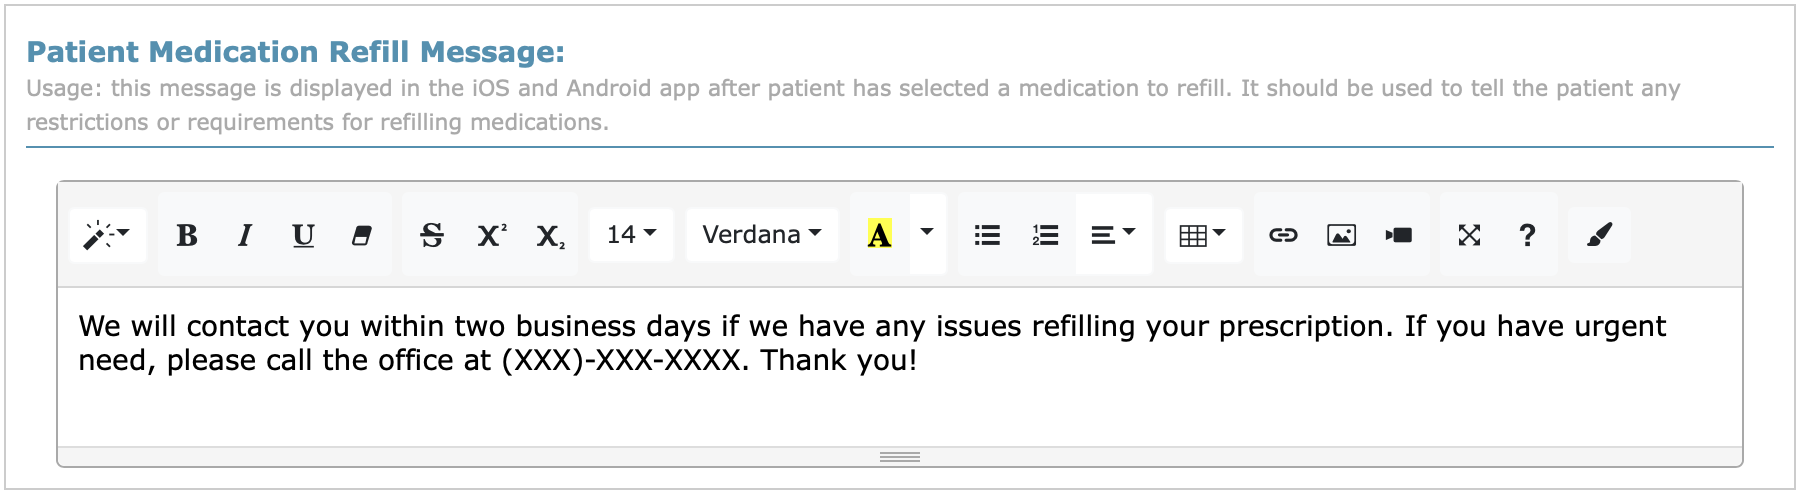 Medication_Refill_Message.png